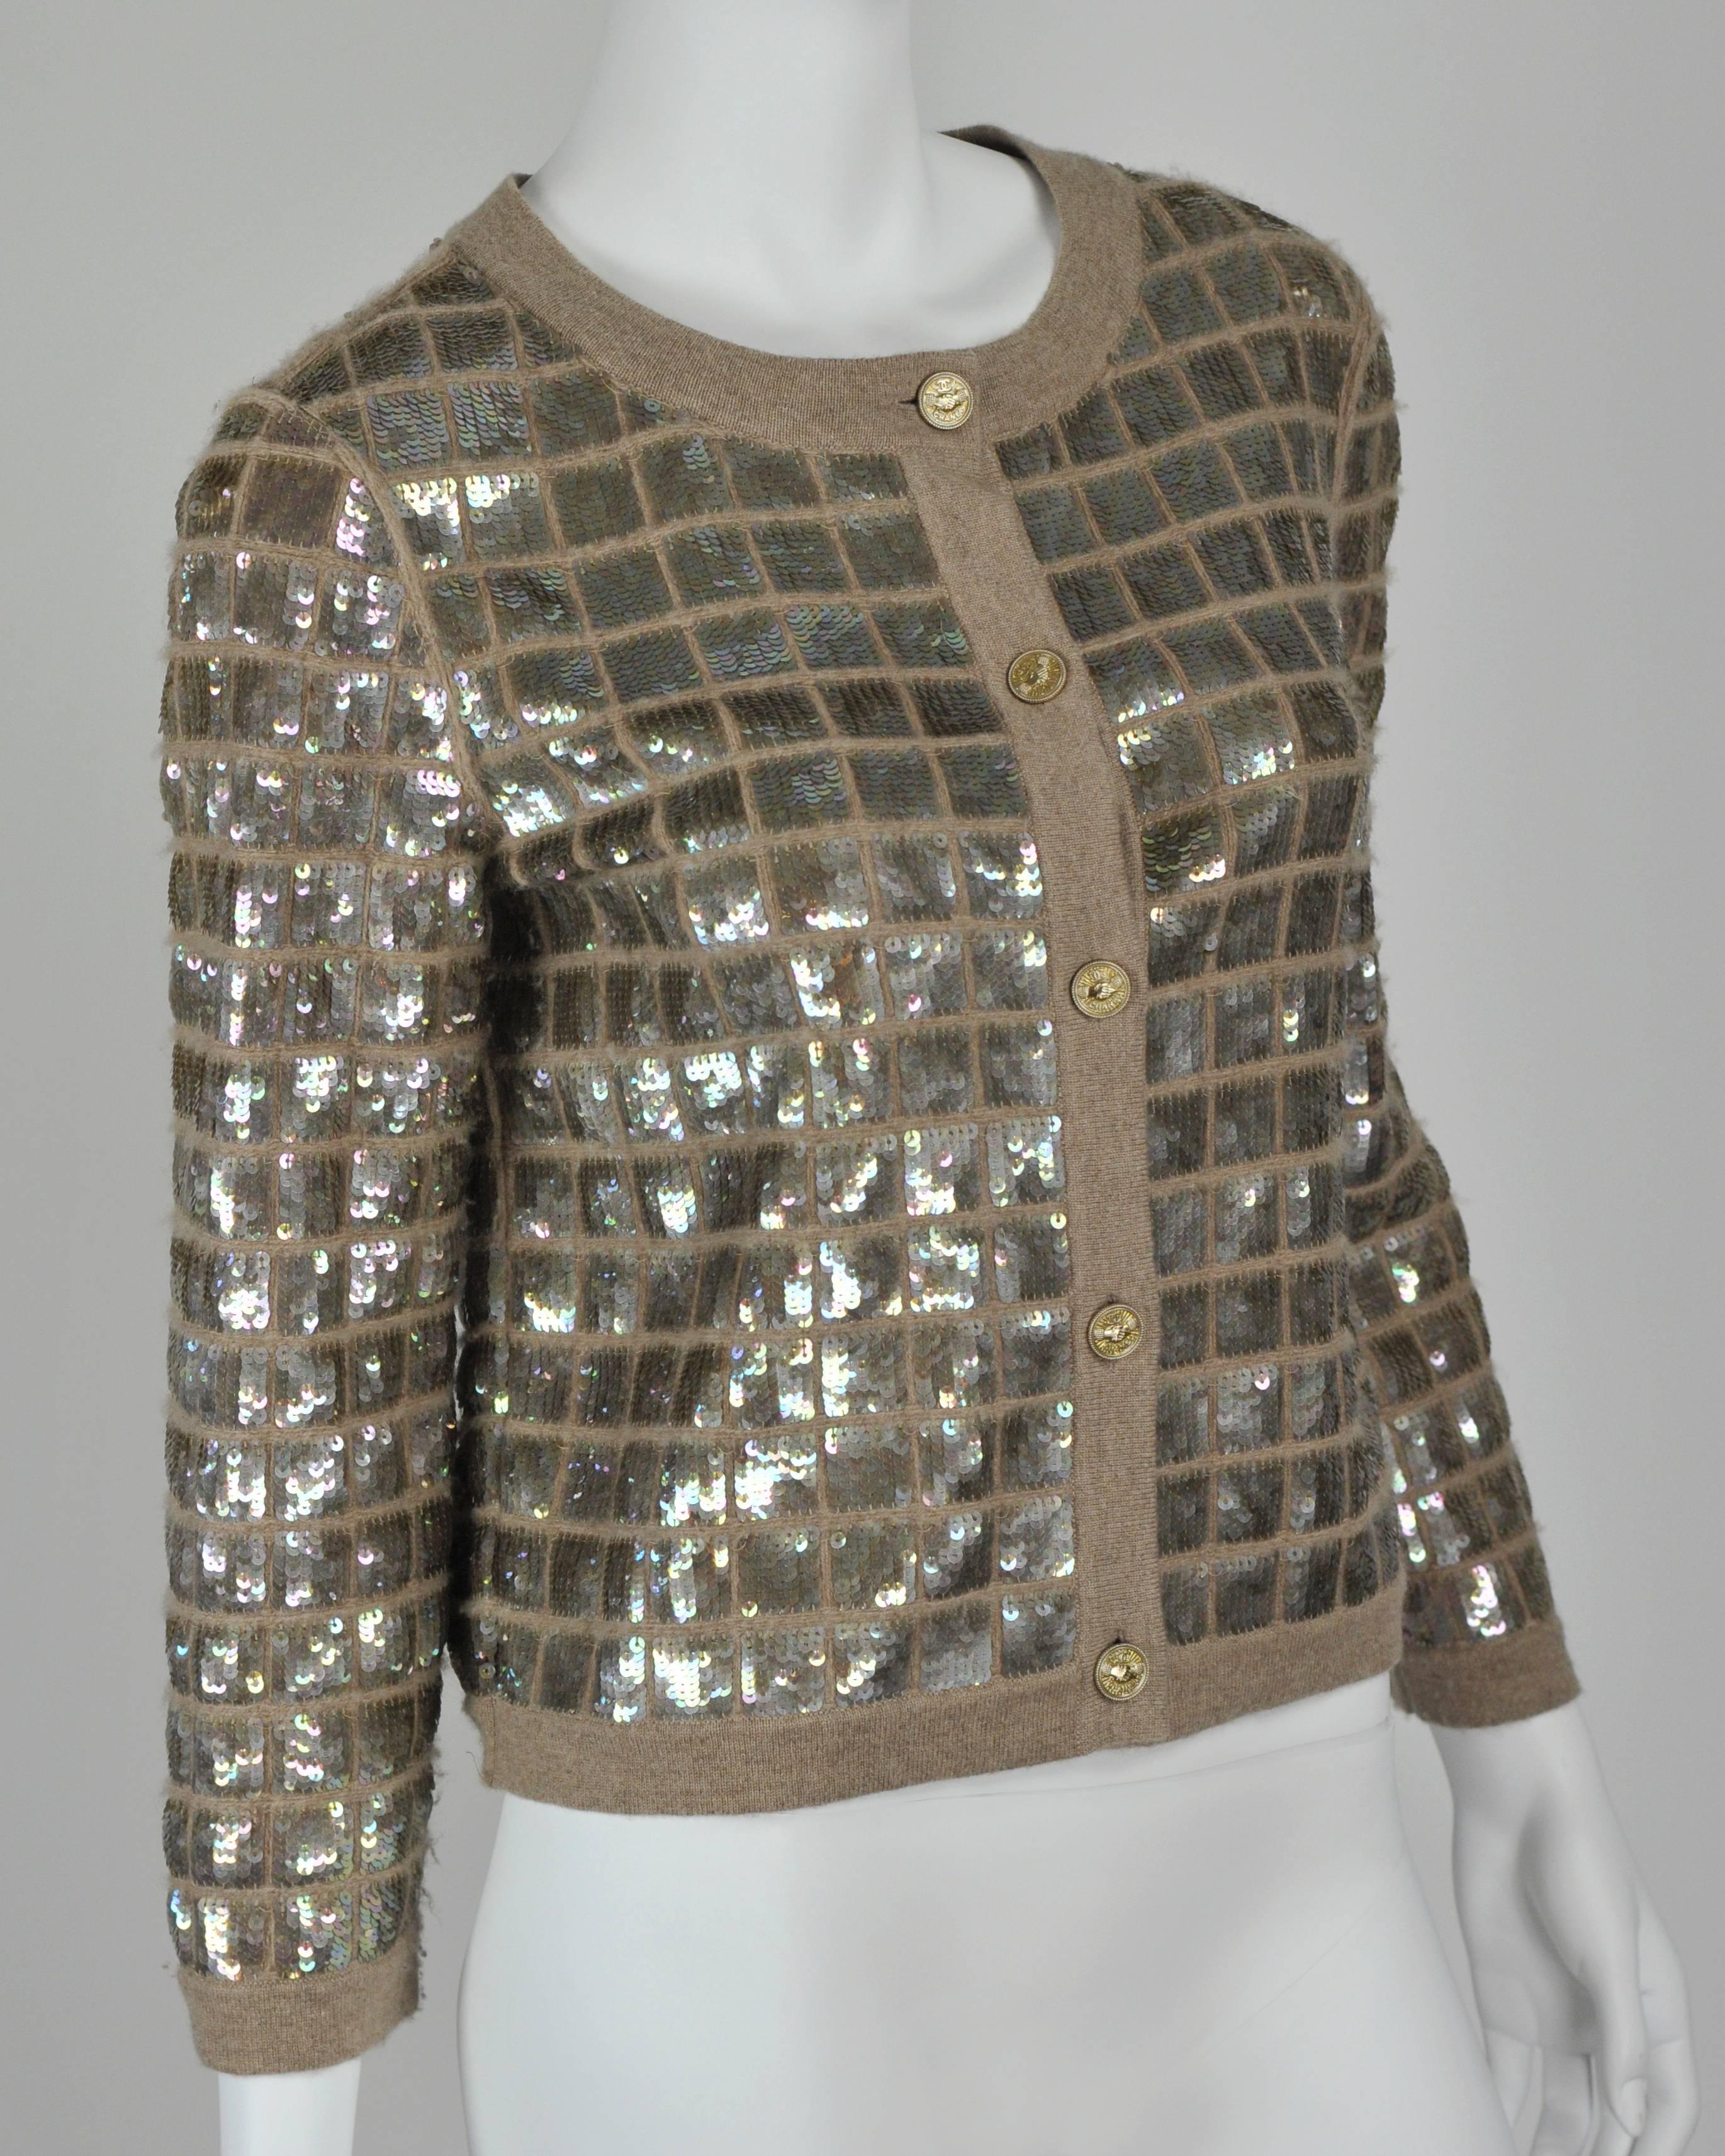 A great go-with-anything cardigan made of Chanel's famous Scottish cashmere and exceptional sequin detailing.  Sequins are 100% polyester.  Extra yarn and button are included. Like new.
Measurements:  Height 20", Bust 36", Wist